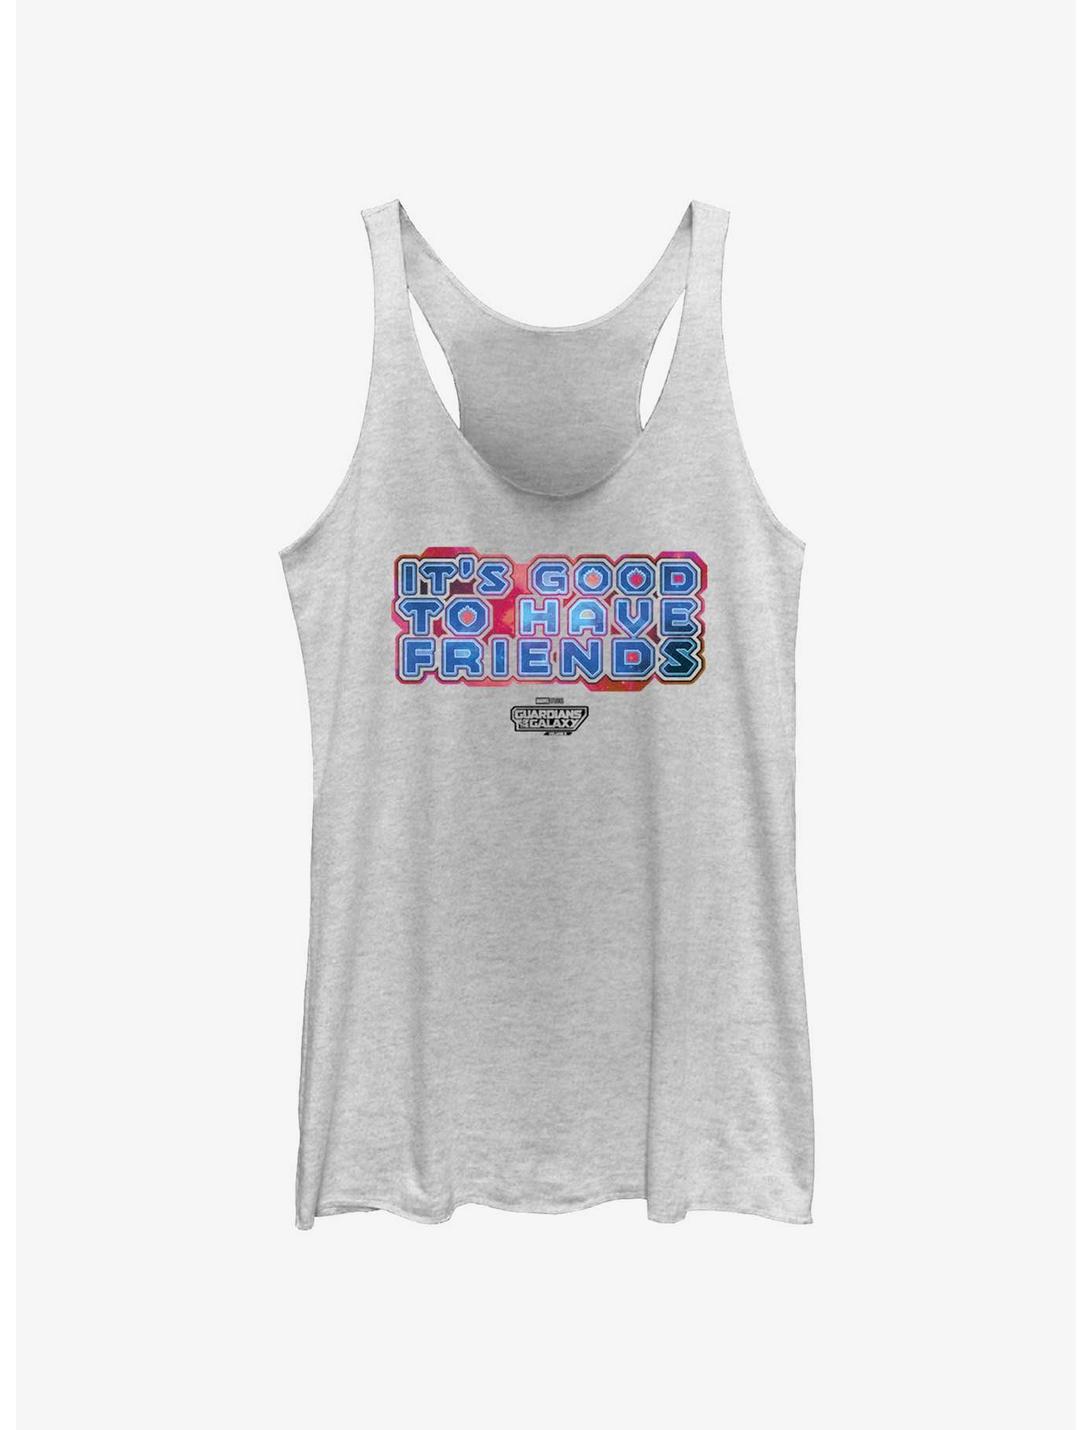 Guardians Of The Galaxy Vol. 3 Good To Have Friends Girls Tank, WHITE HTR, hi-res